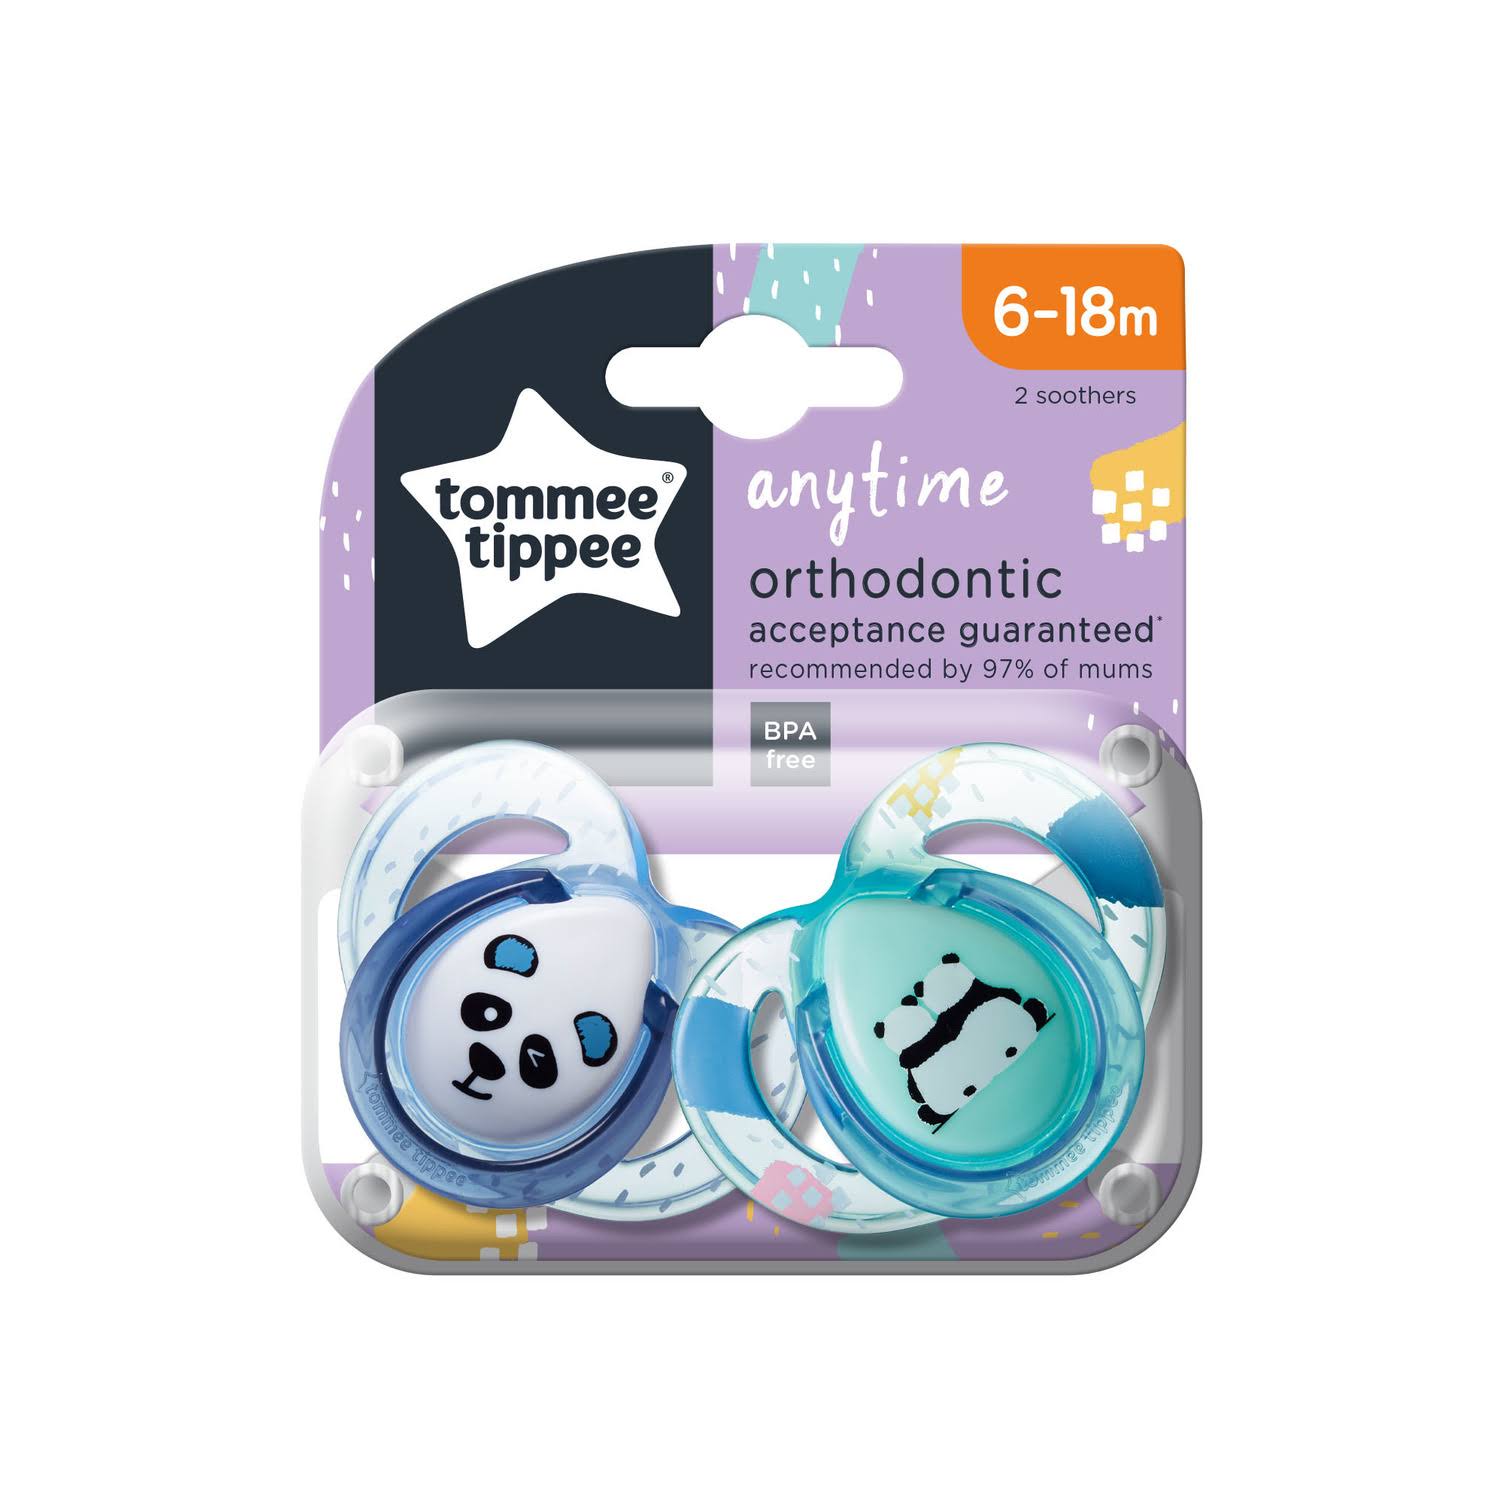 Tommee Tippee Anytime 2 Orthodontic Soothers - Blue, 6-18 Months